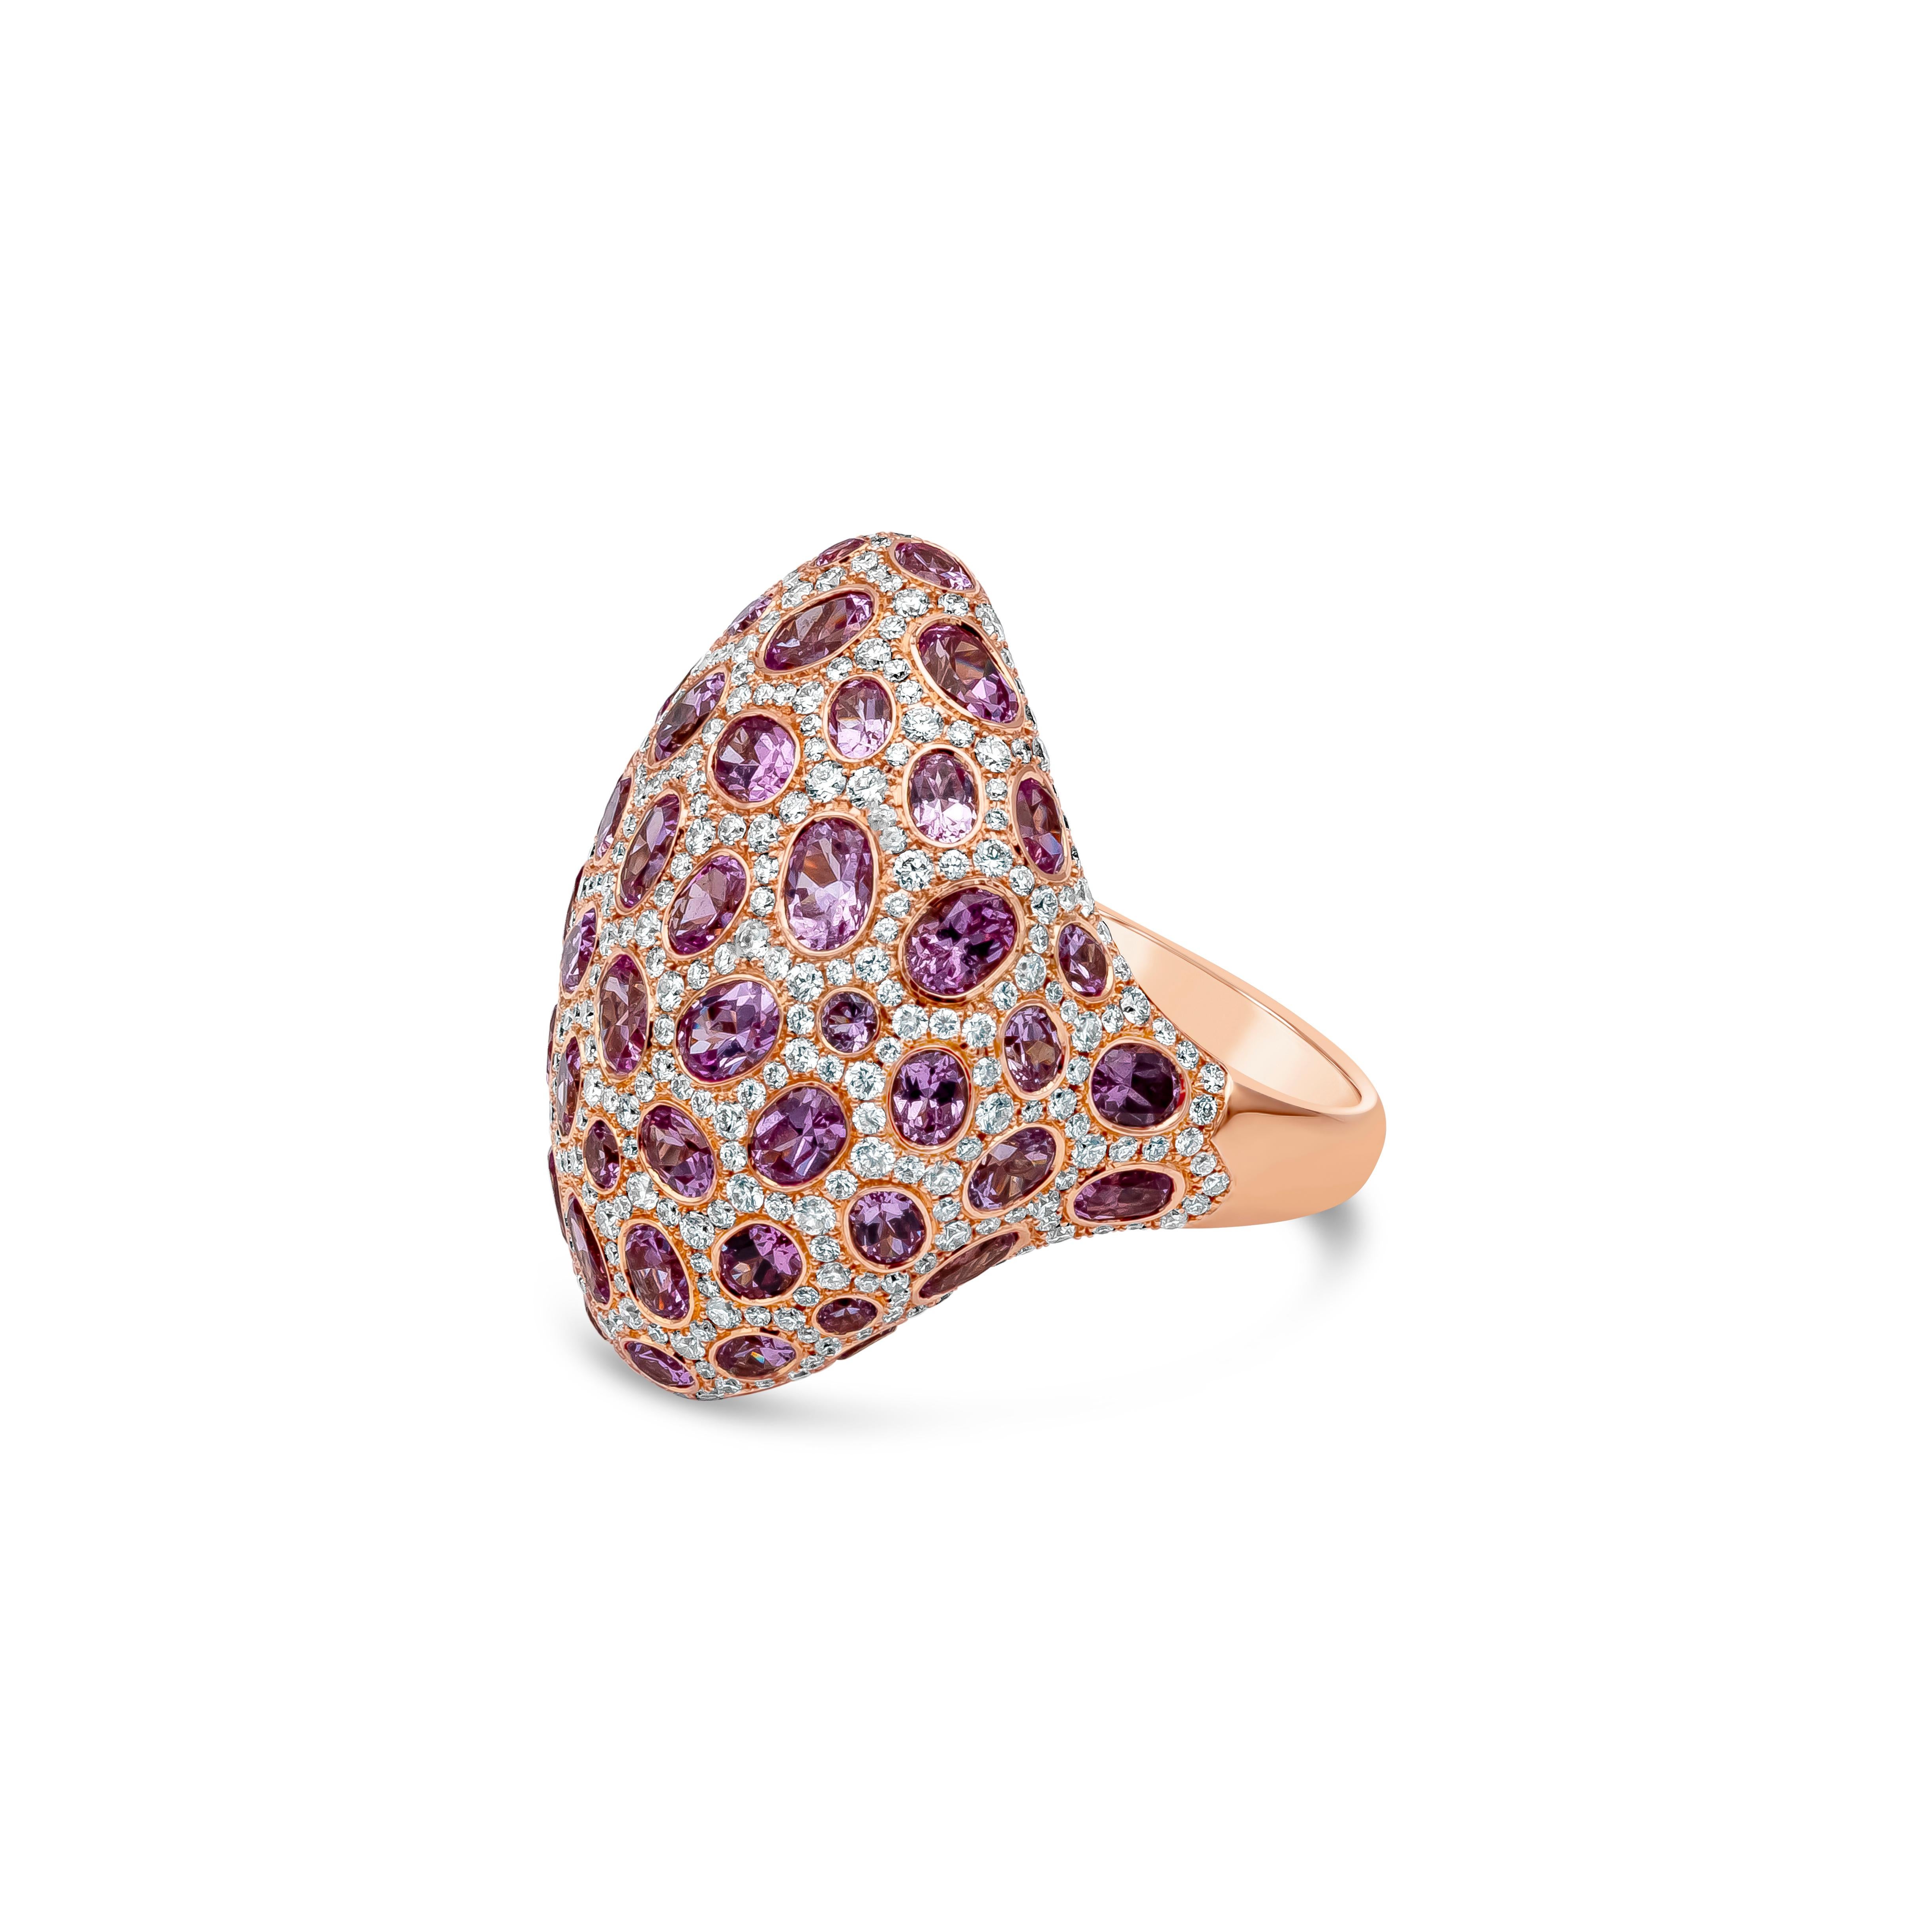 An enchanting piece of fashion ring showcasing 64 oval cut pink sapphires weighing 9.91 carats, bezel set in a cluttered design, surrounded by brilliant round melee diamonds around weighing 2.18 carats total. Made in a dome shape in 18K Rose Gold,